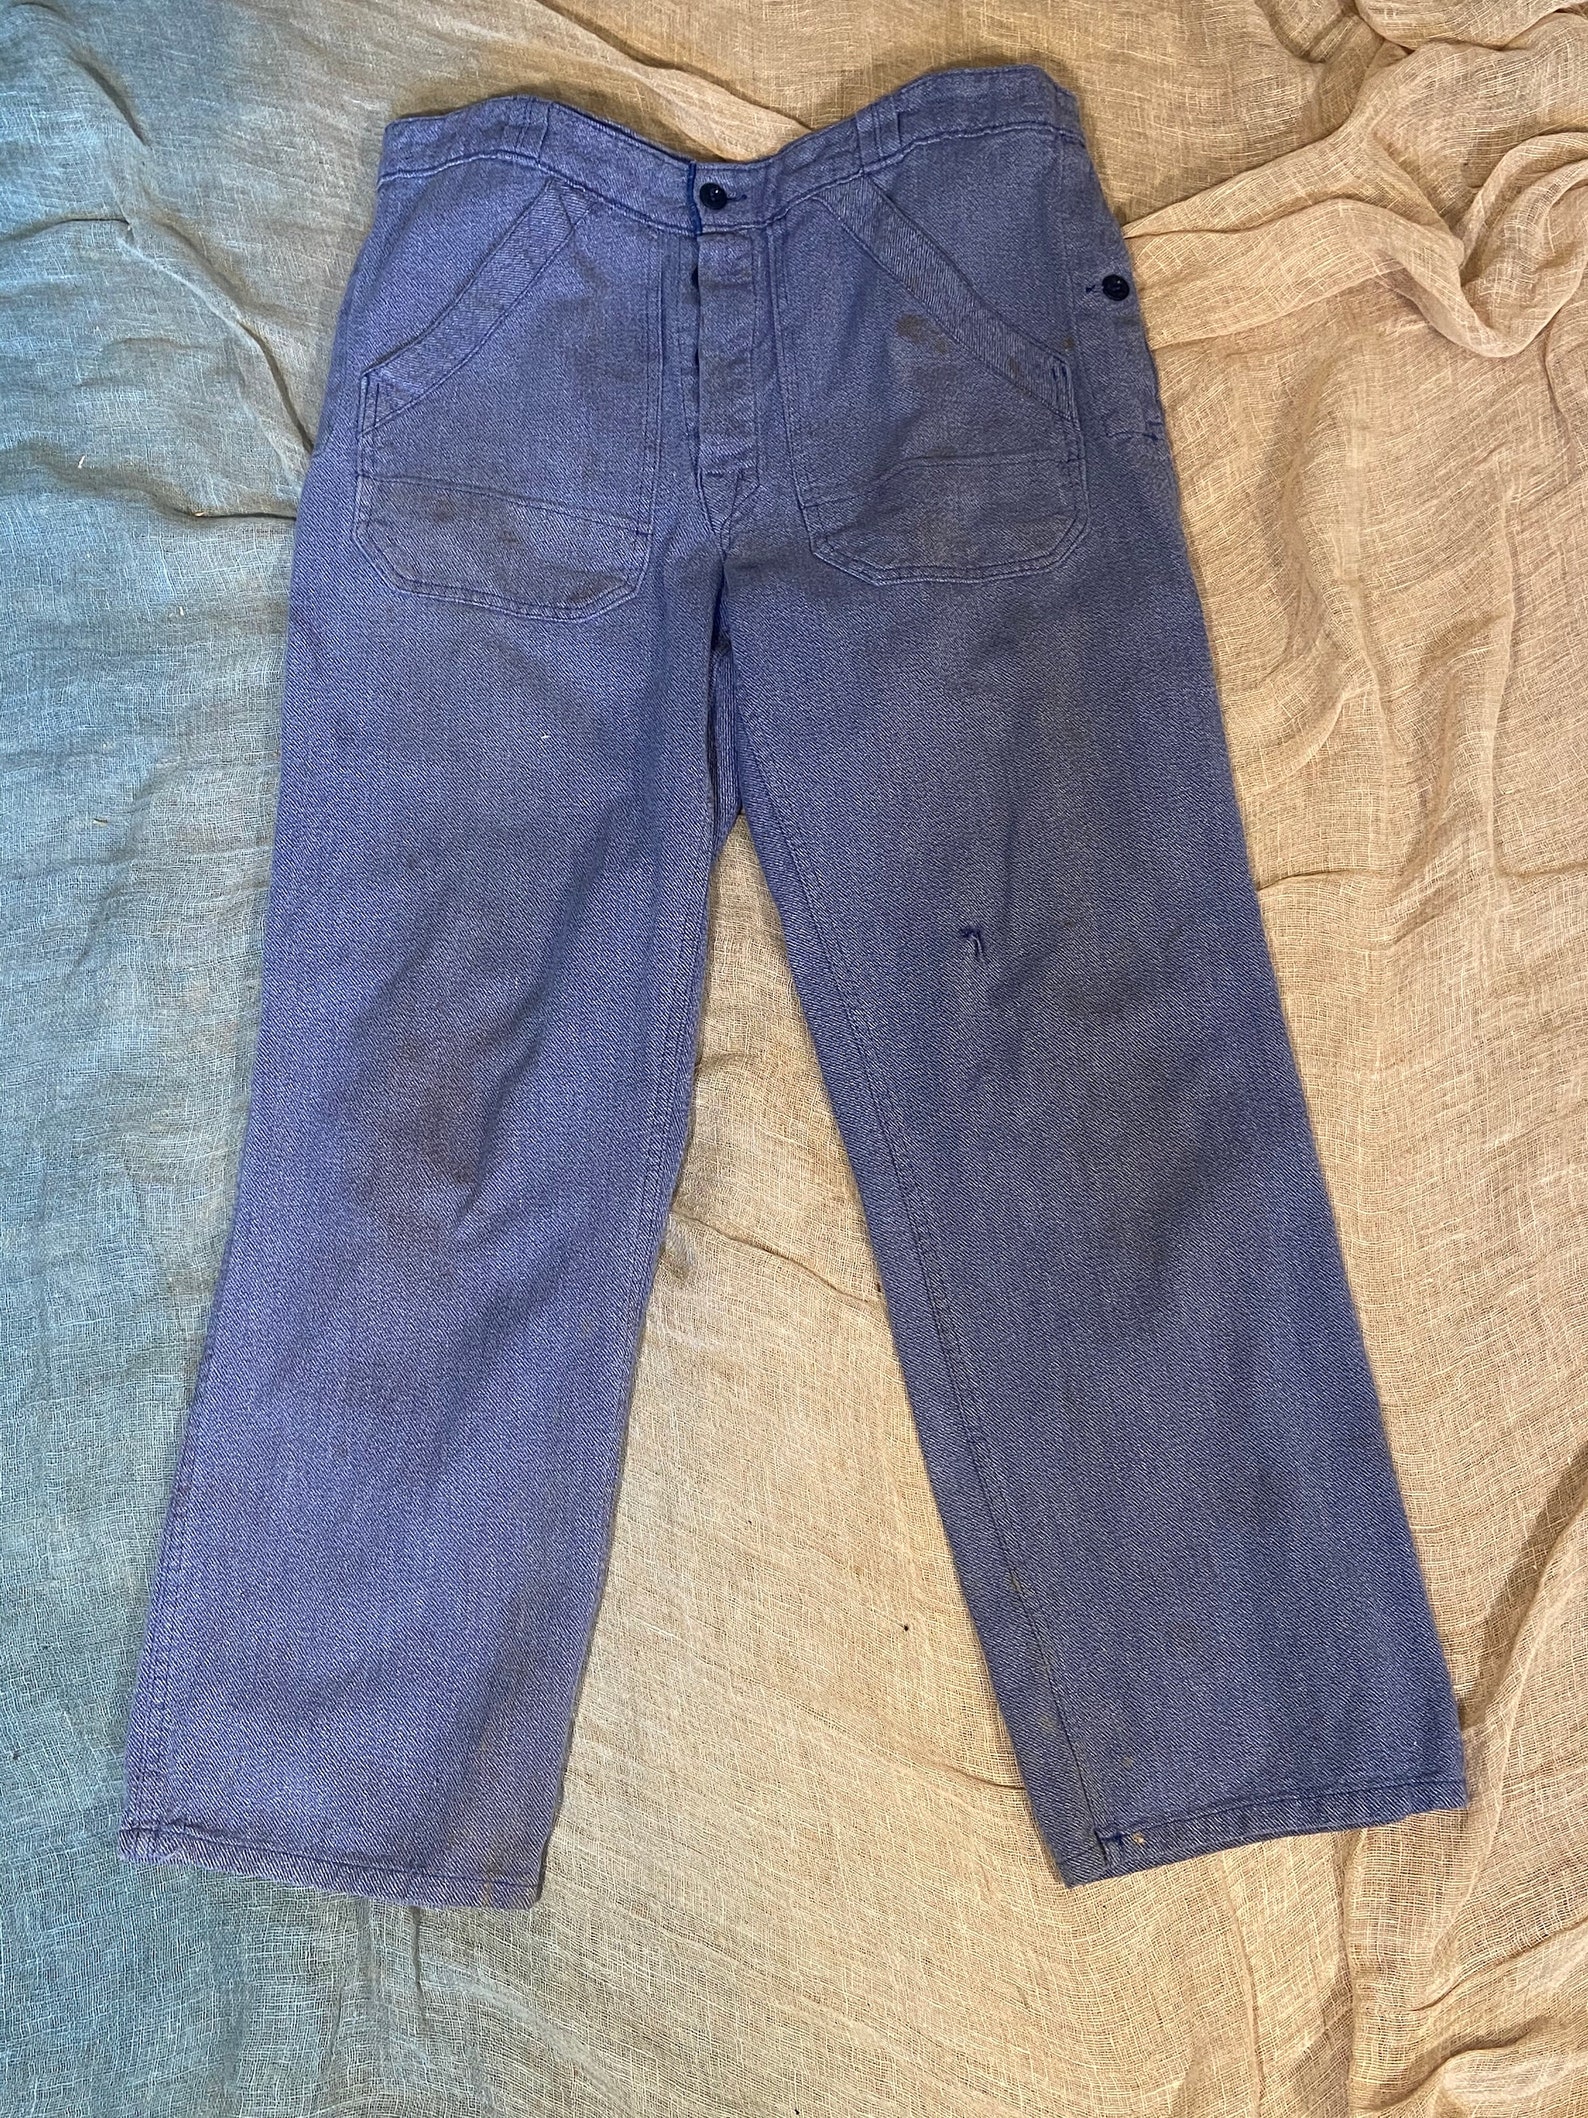 Light Blue Workwear Trousers with Pockets | Etsy